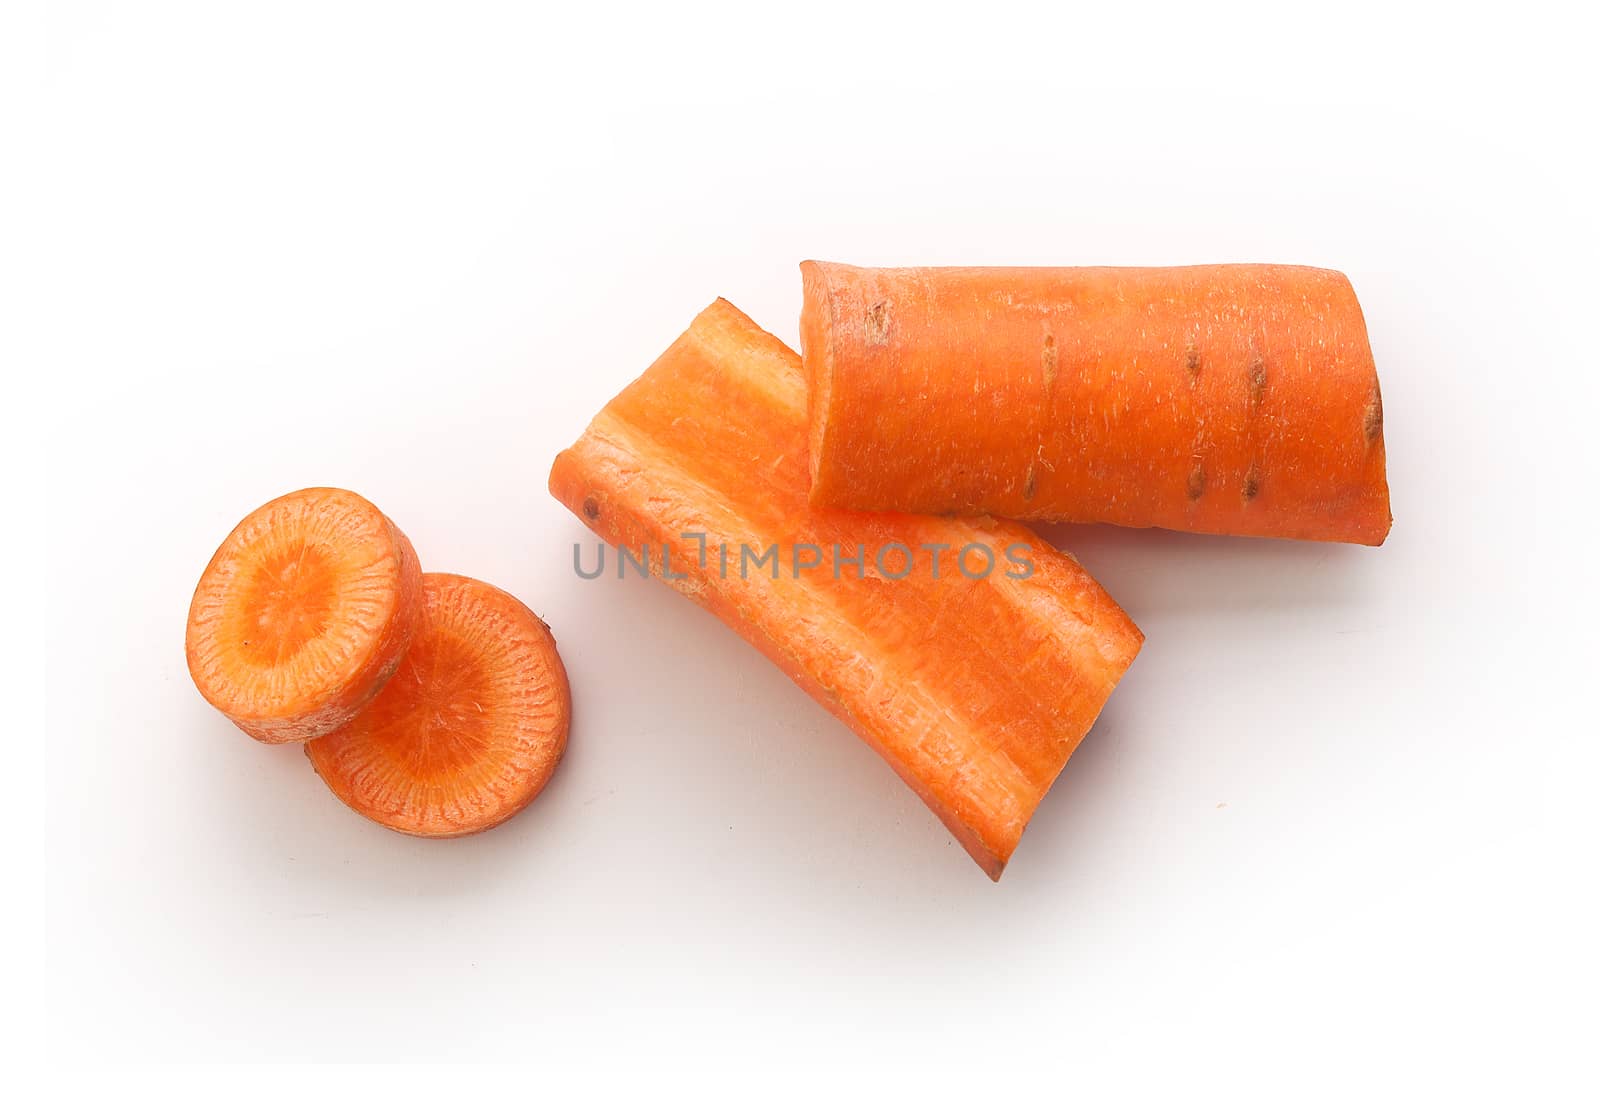 Top view of pieces and slices of carrot on the white background